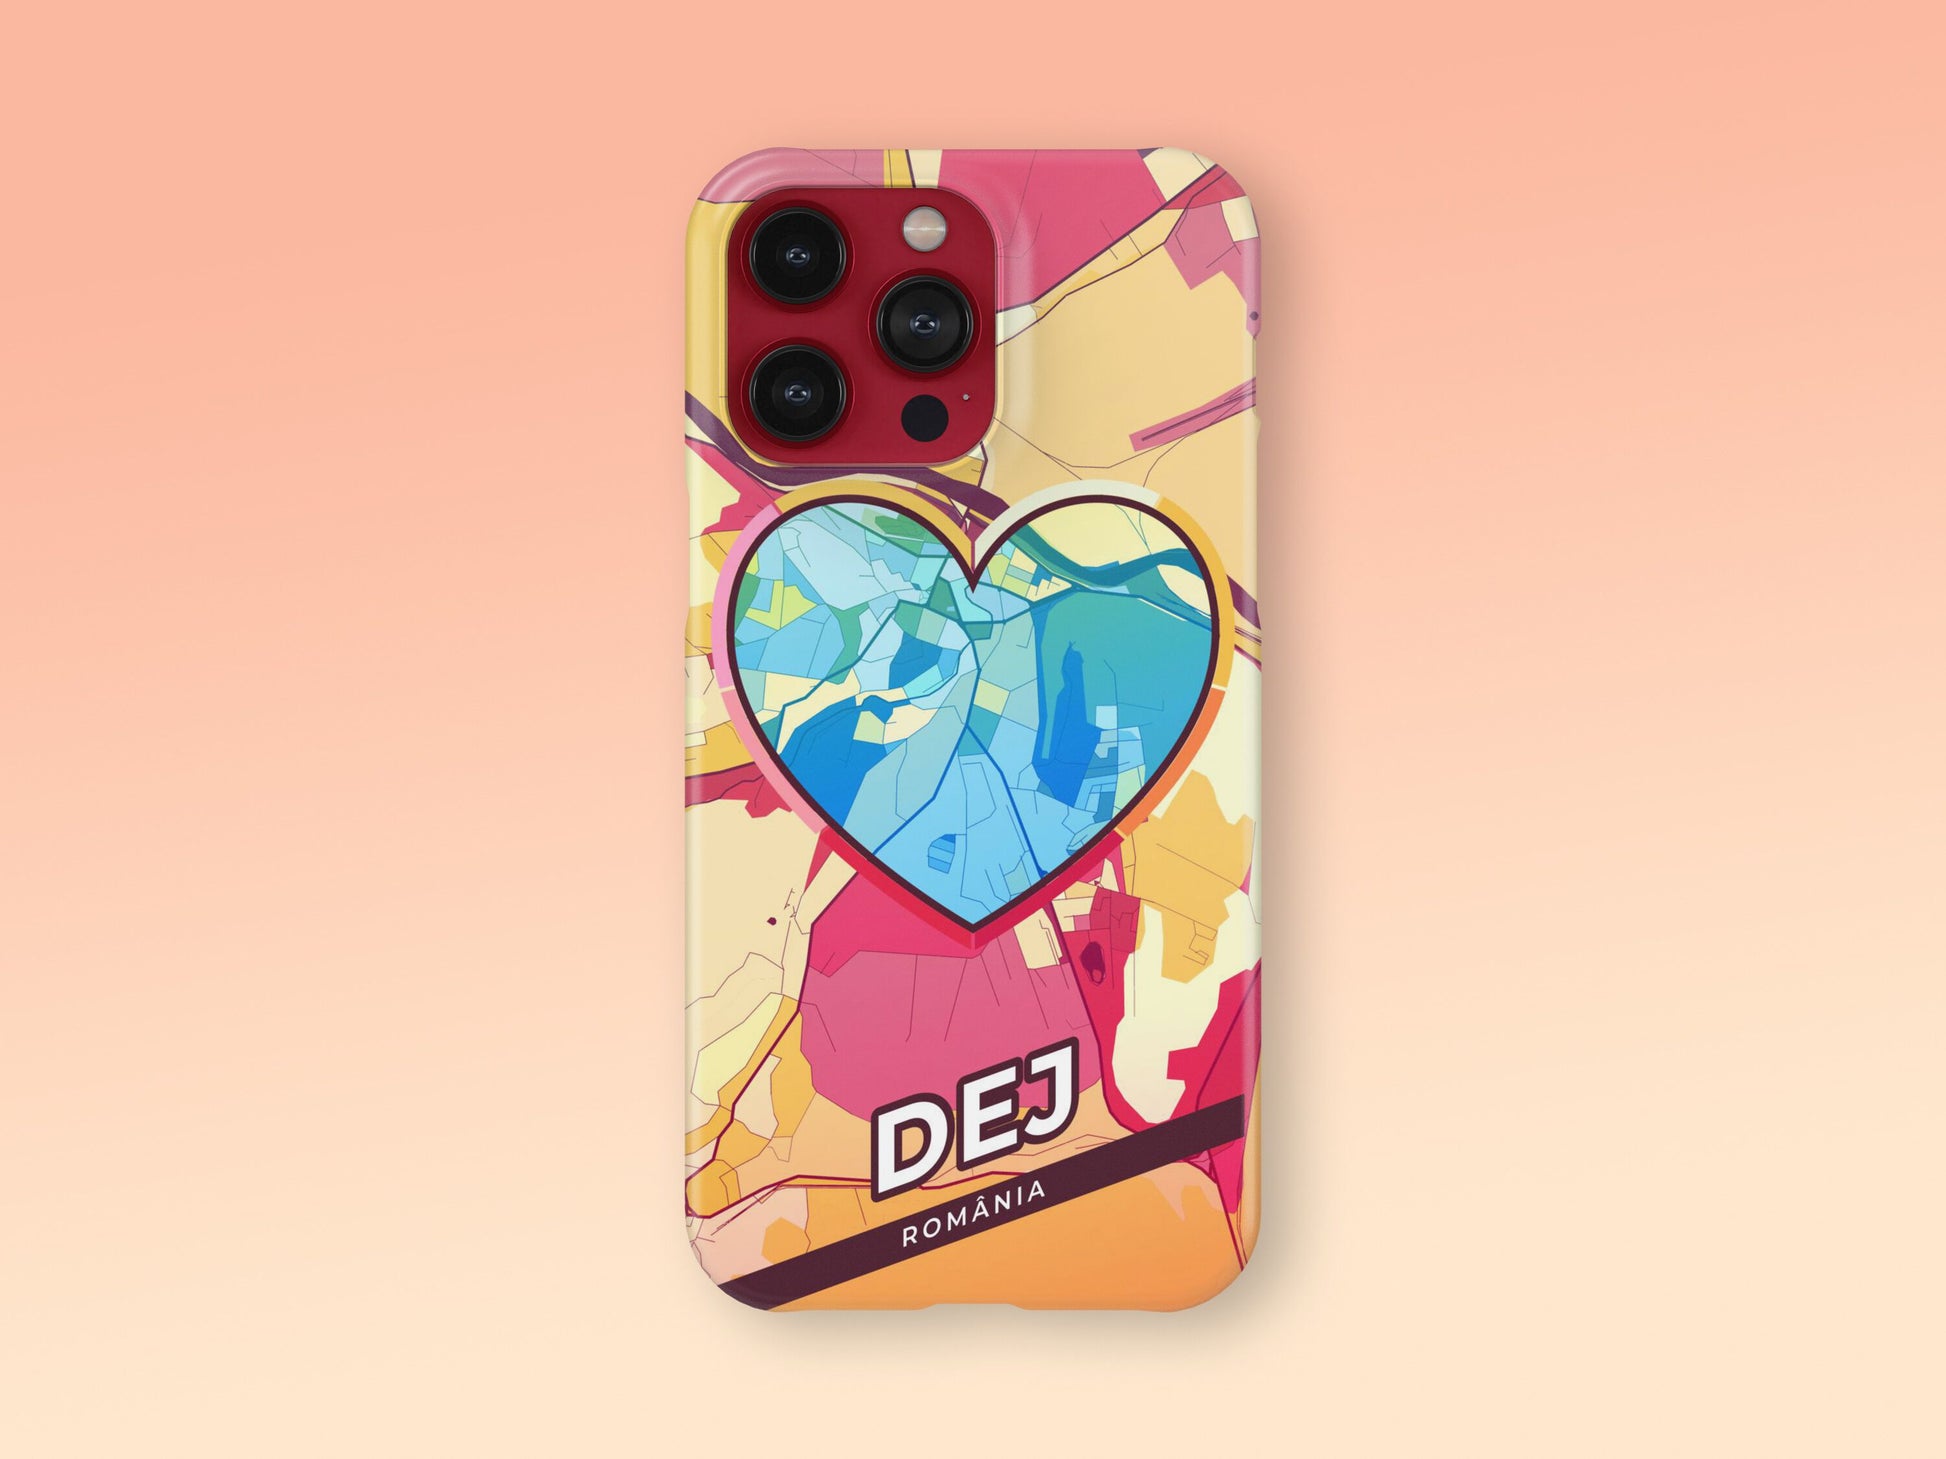 Dej Romania slim phone case with colorful icon. Birthday, wedding or housewarming gift. Couple match cases. 2